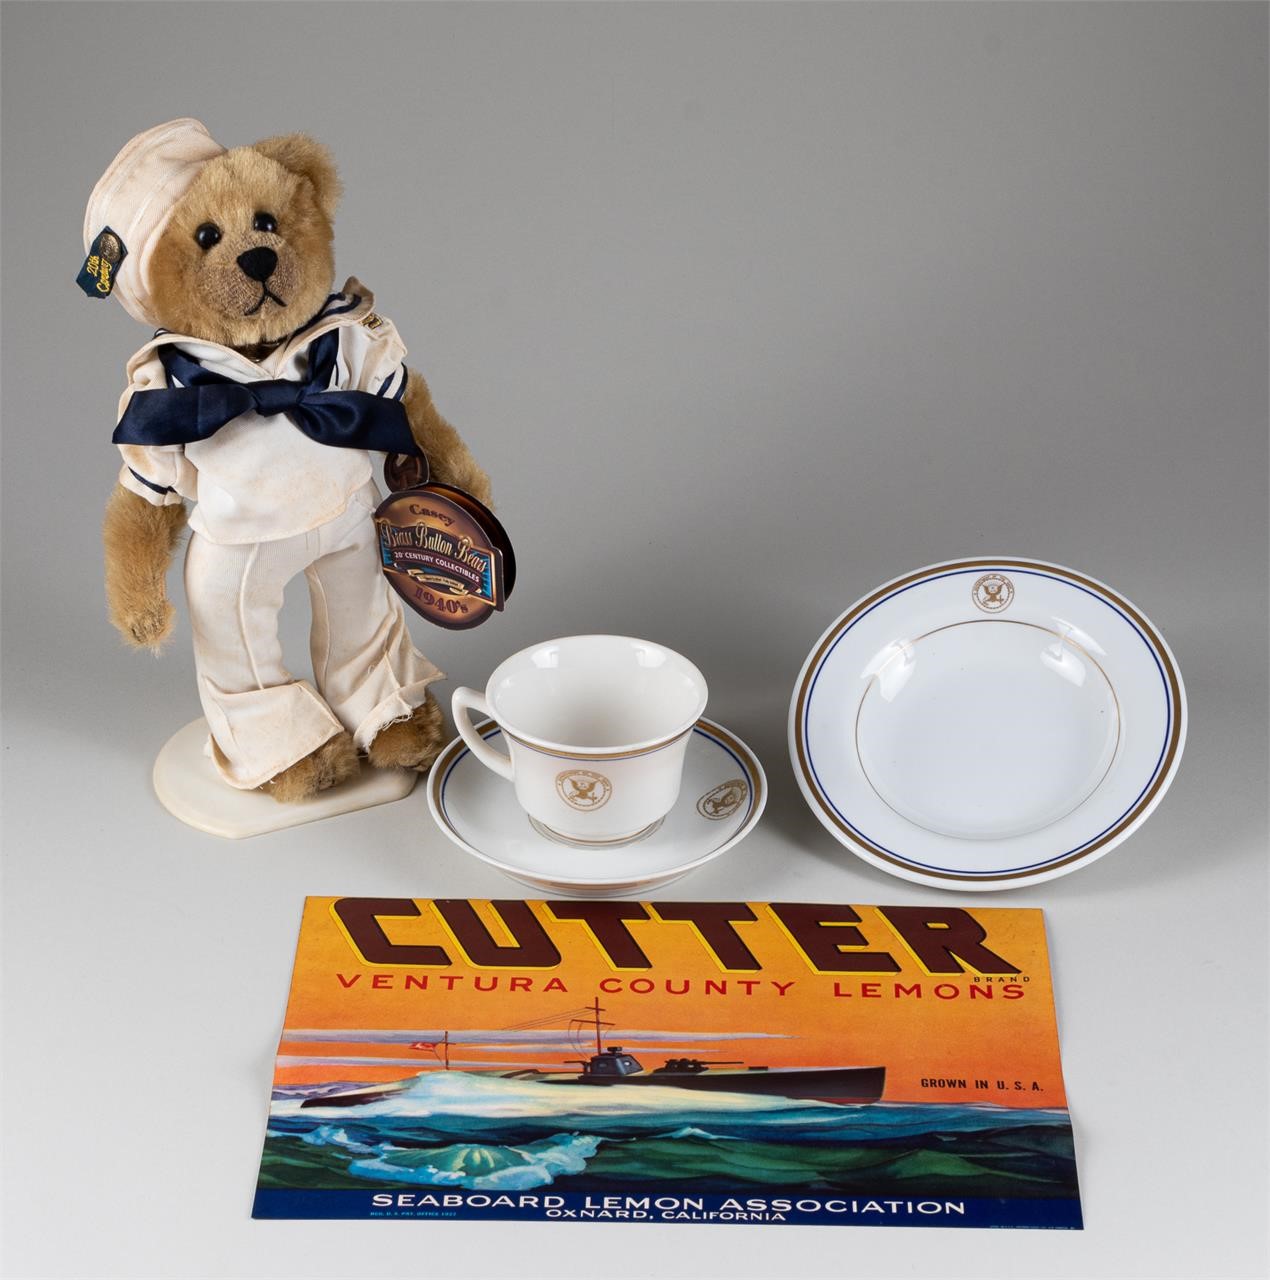 US NAVY DEPARTMENT COLLECTIBLES